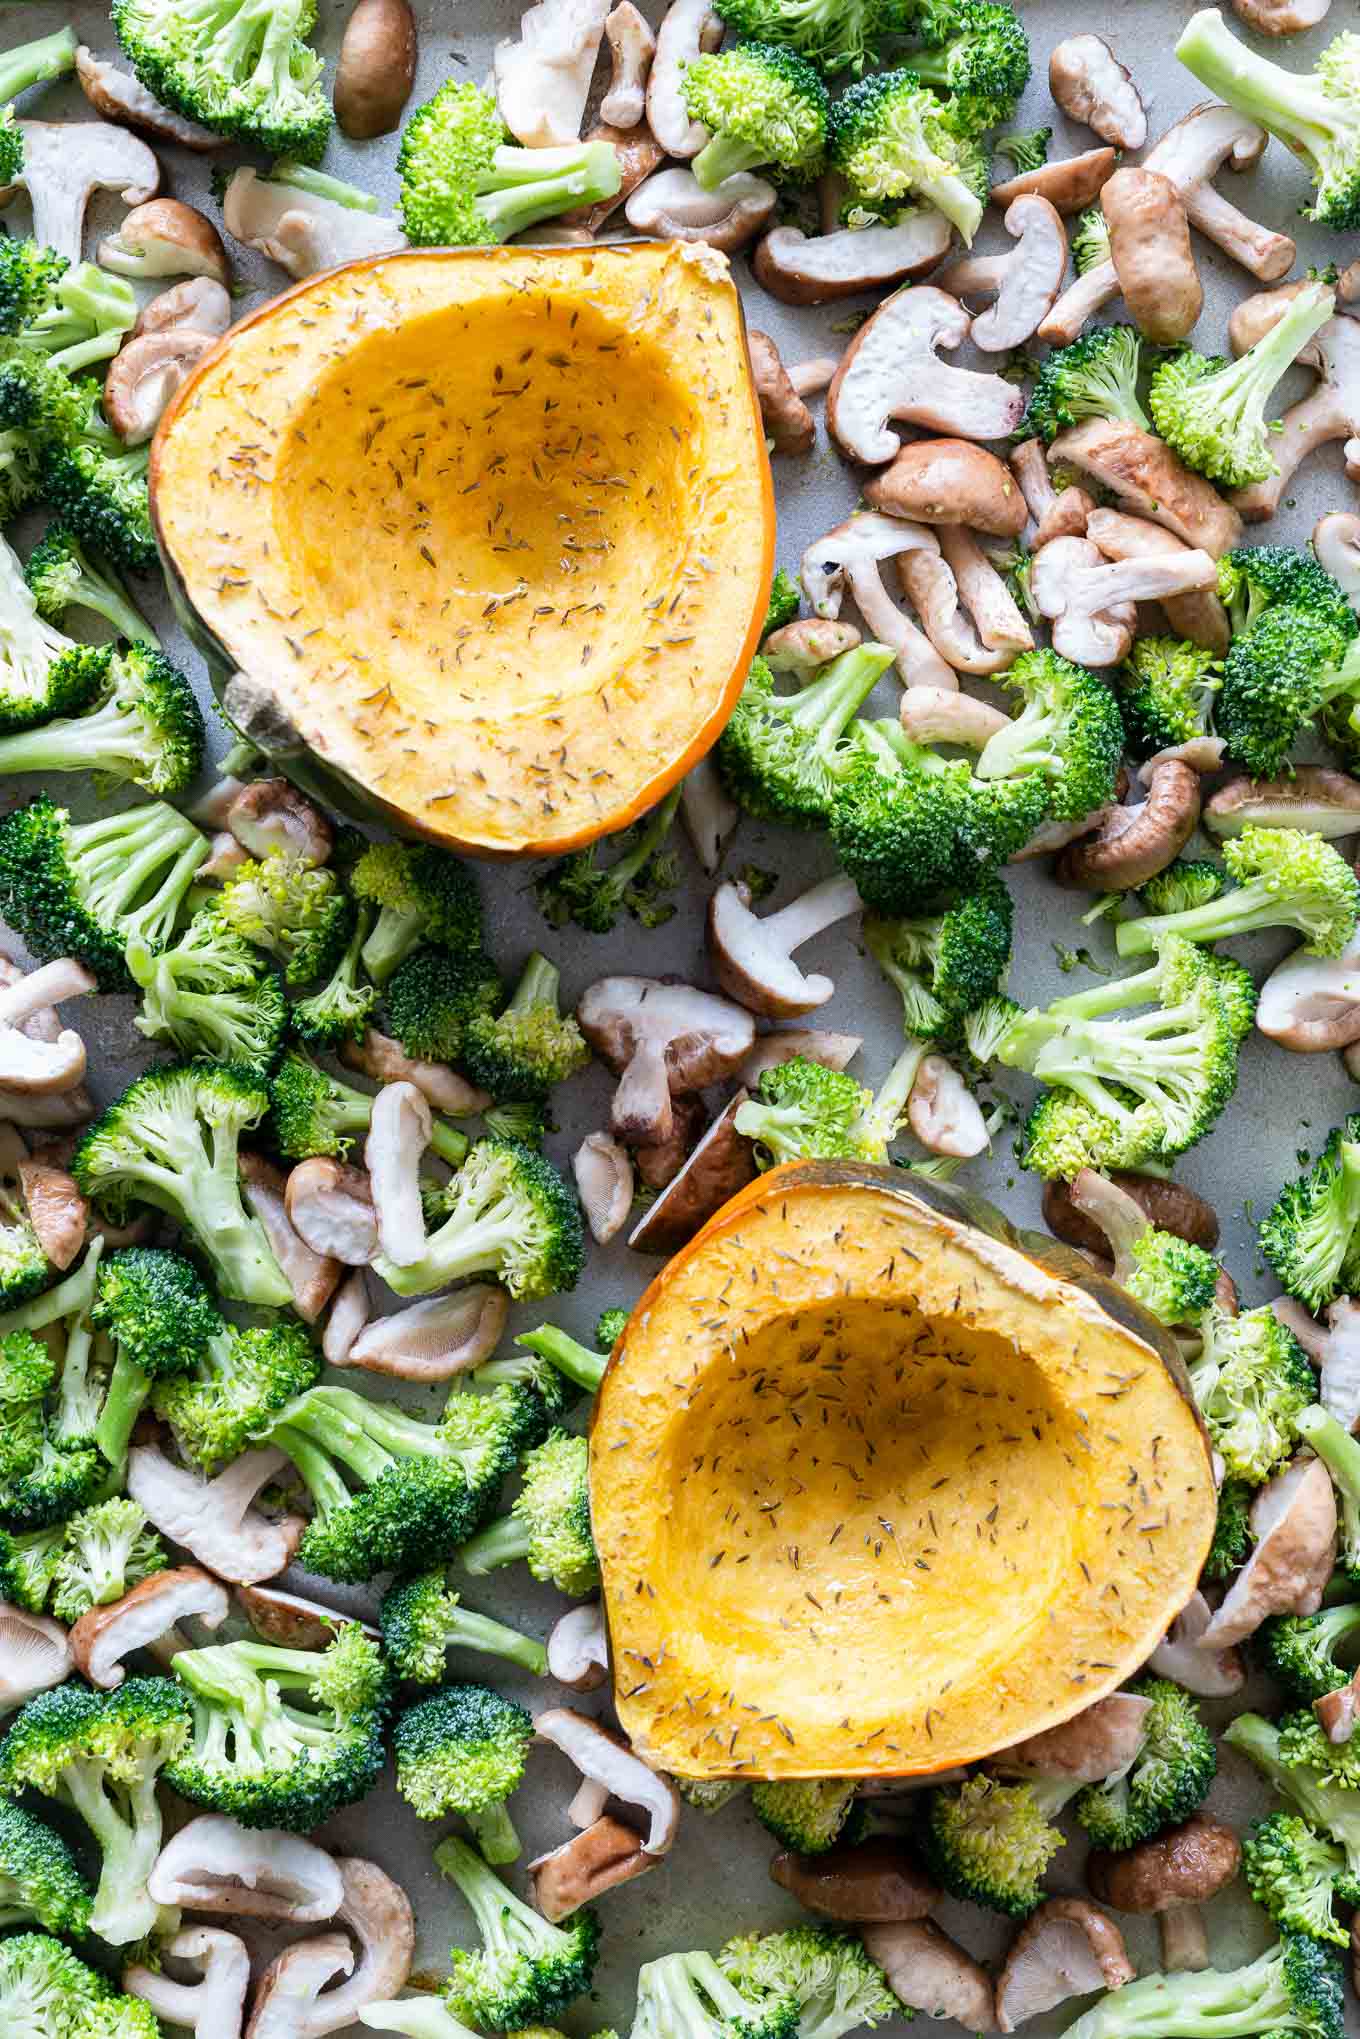 Acorn Squash halves on a sheet tray surrounded by broccoli and mushrooms